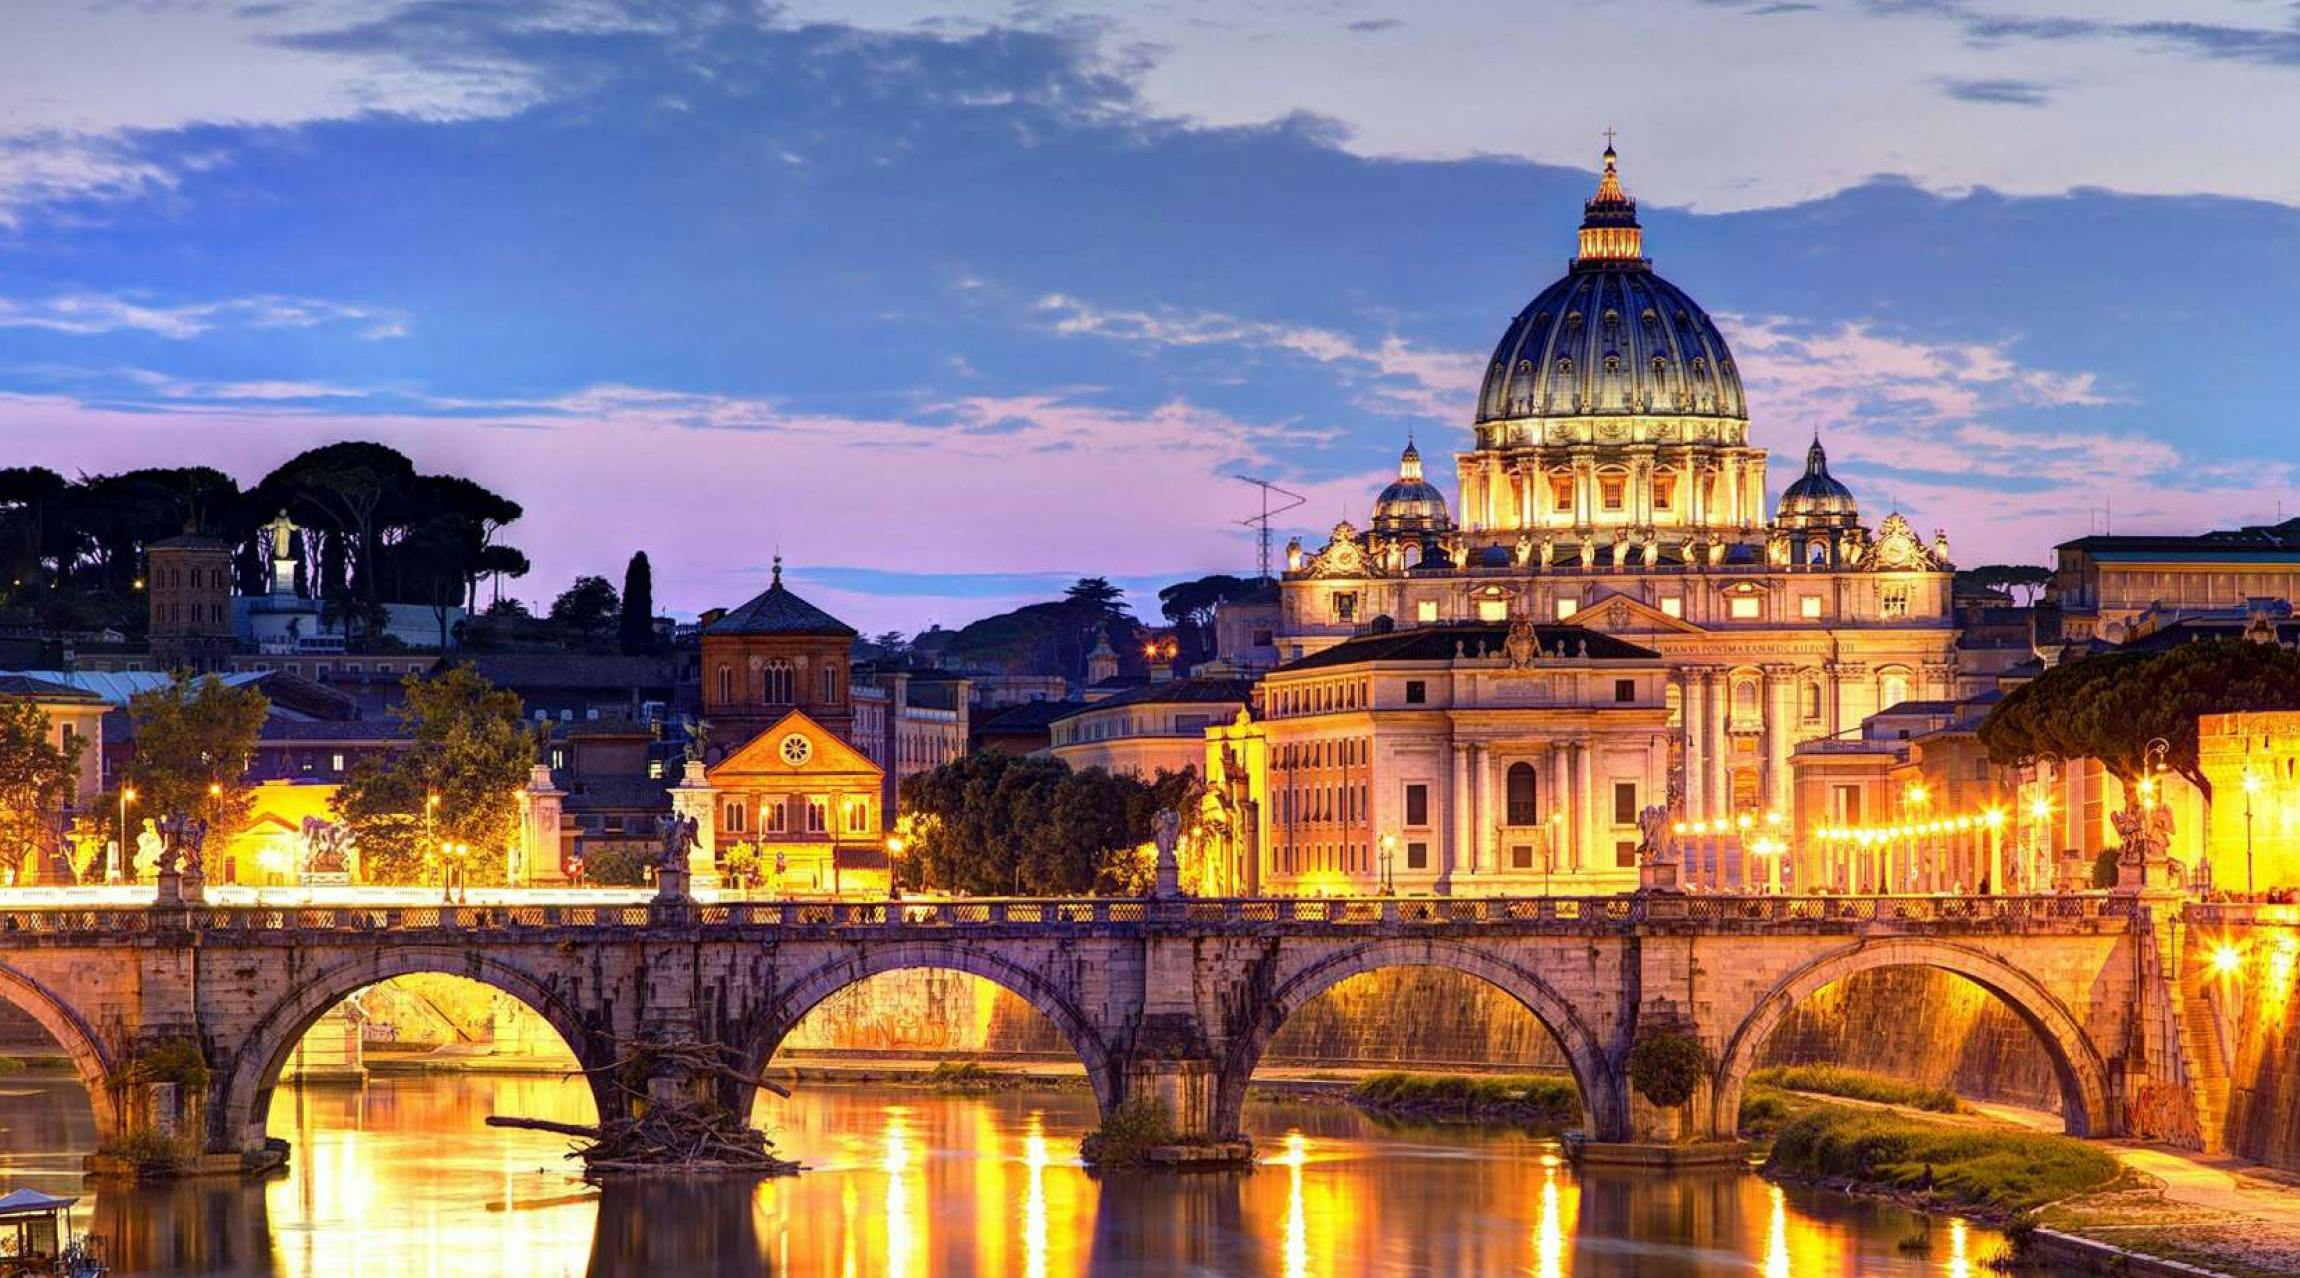 View of the city of Rome illuminated at sunset